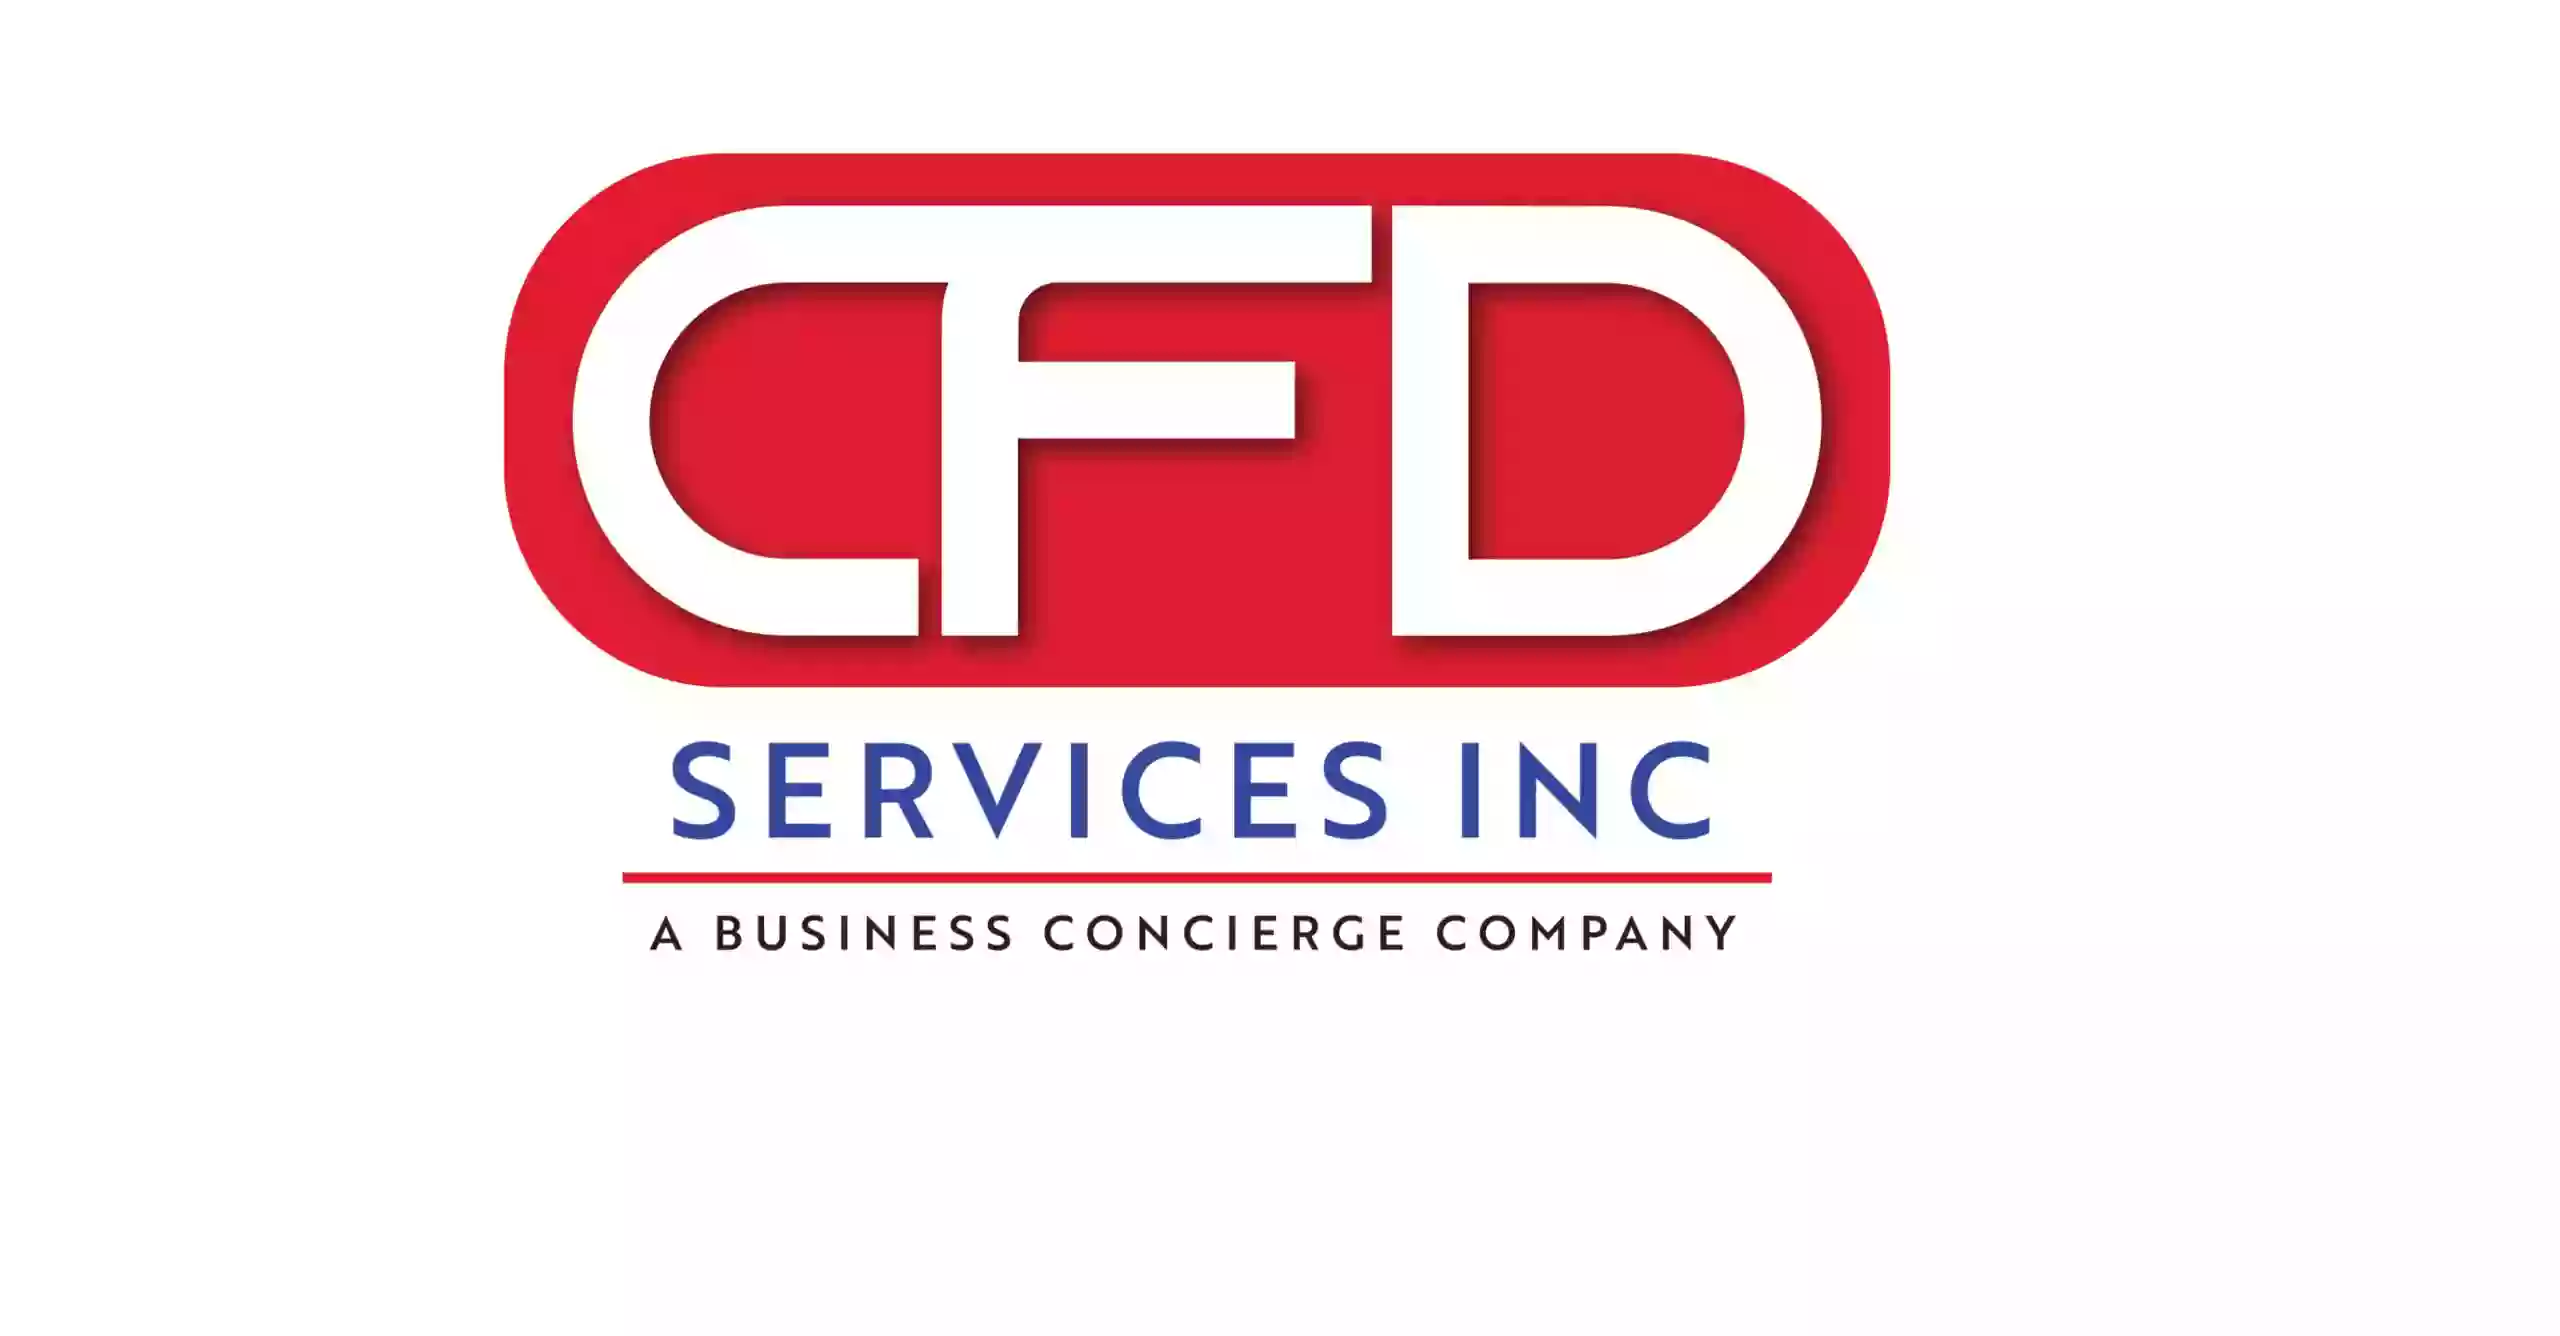 CFD Services Inc